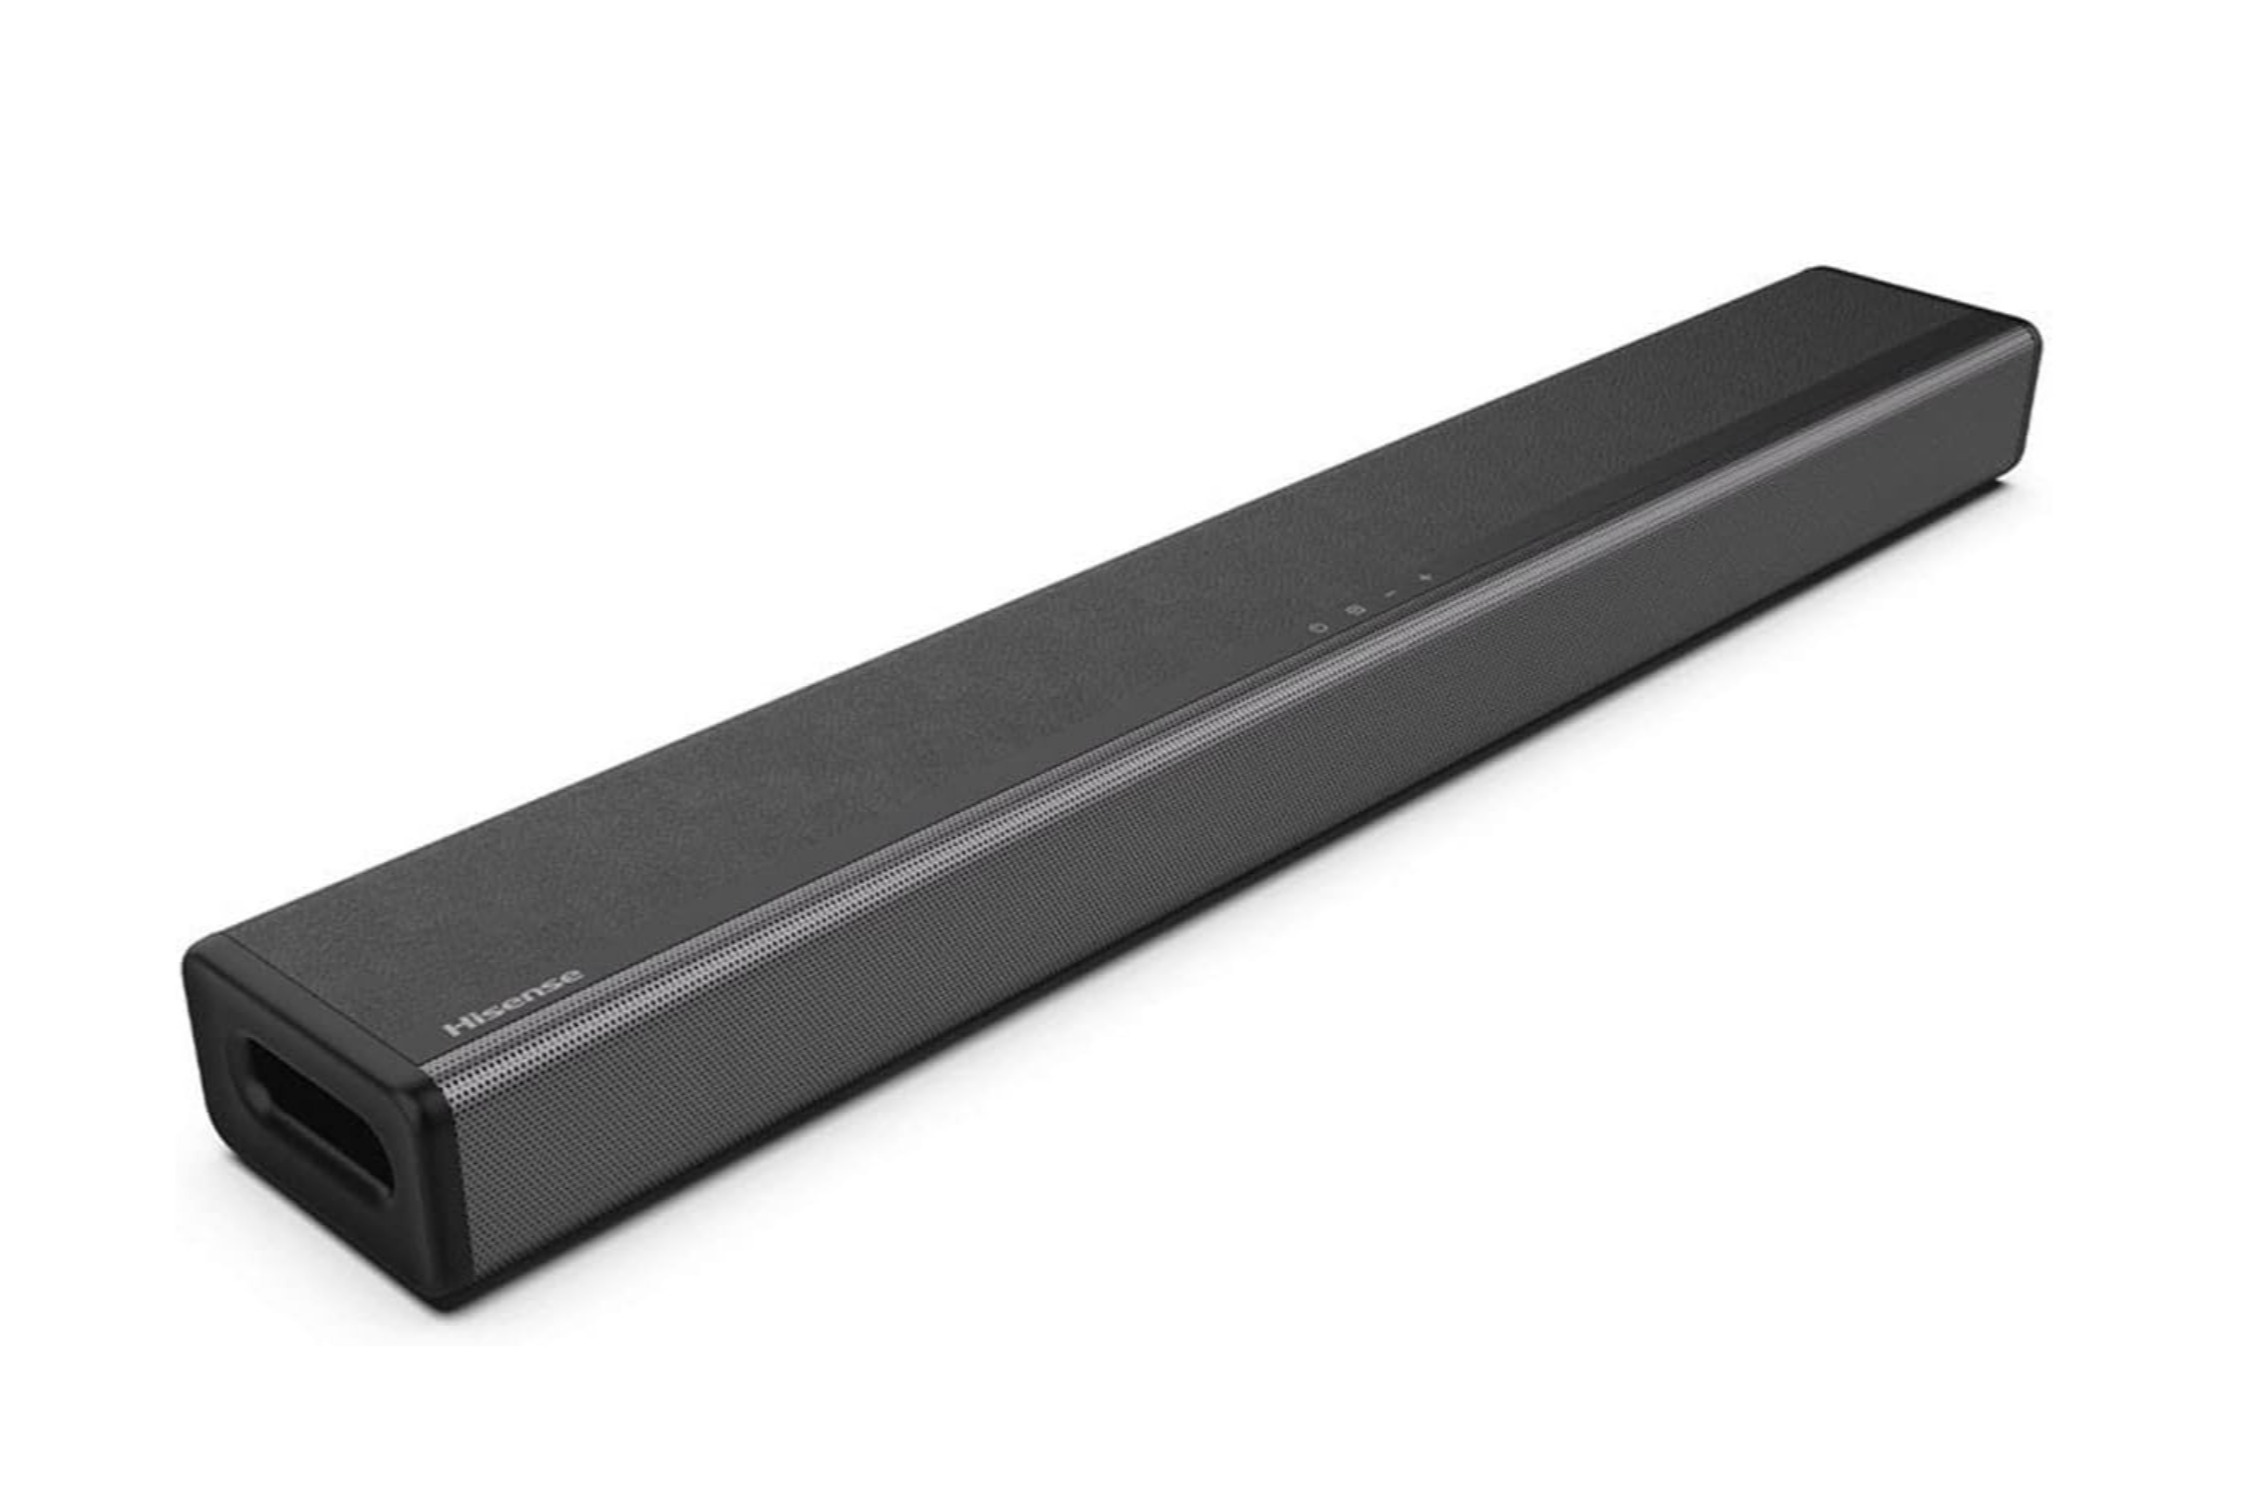 Amazon shoppers rush to buy ‘absolutely brilliant’ $130 soundbar reduced to $90